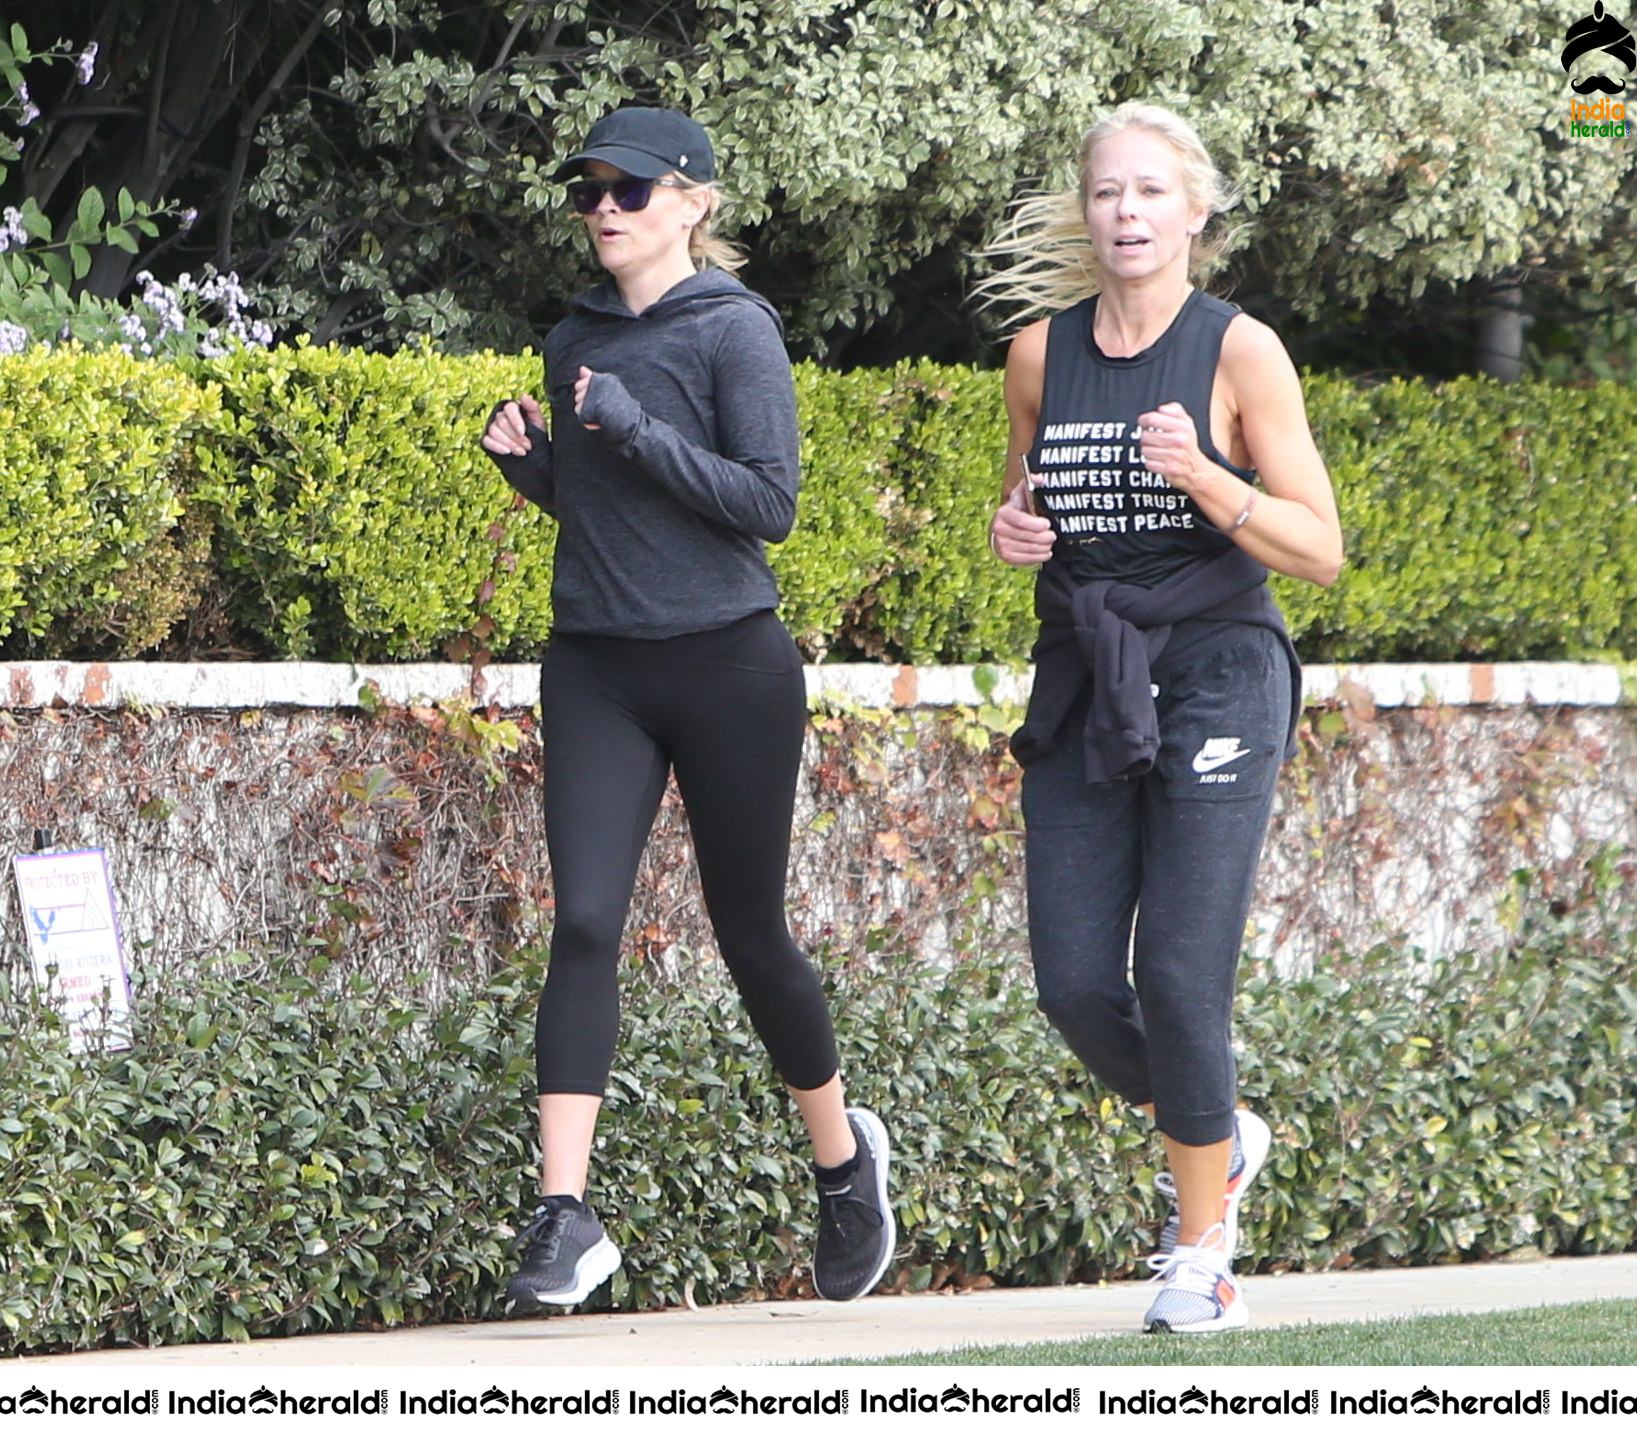 Reese Witherspoon seen jogging with a friend in Los Angeles